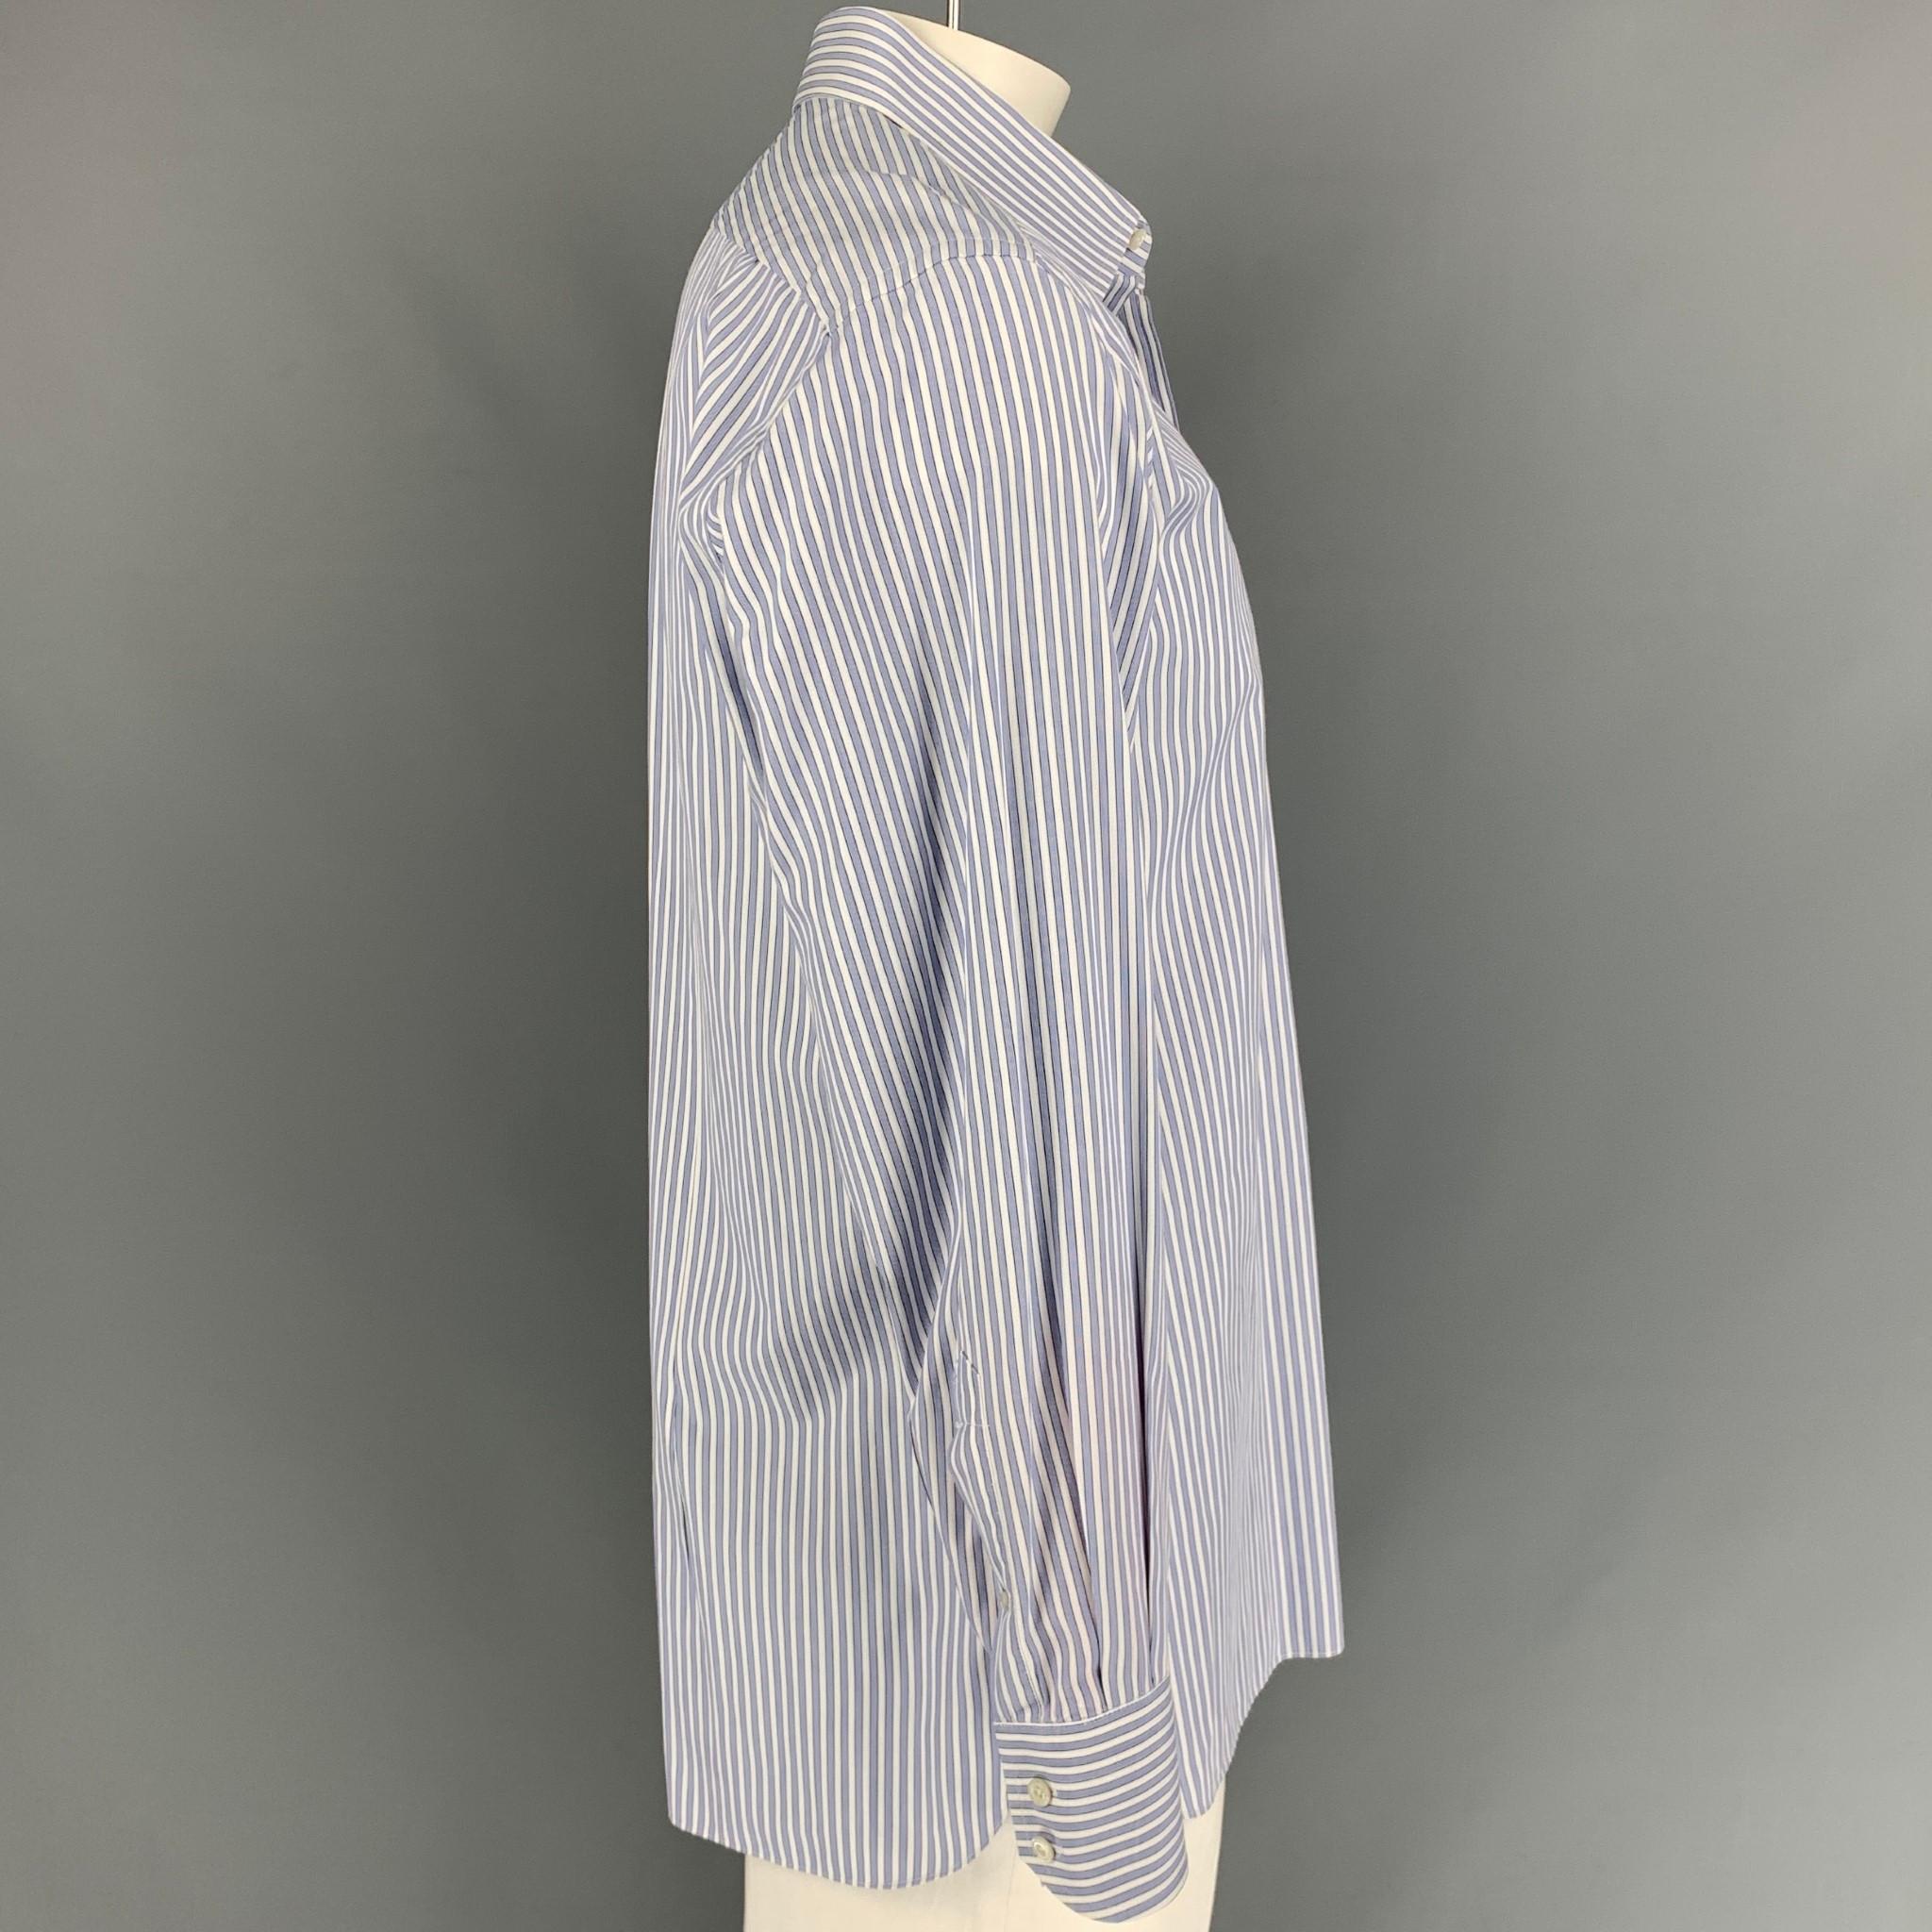 TOM FORD long sleeve shirt comes in a blue & white stripe cotton featuring a pointed collar and a buttoned closure. 

Very Good Pre-Owned Condition.
Marked: 44/17.5

Measurements:

Shoulder: 18.5 in.
Chest: 46 in.
Sleeve: 26.5 in.
Length: 31 in. 

 